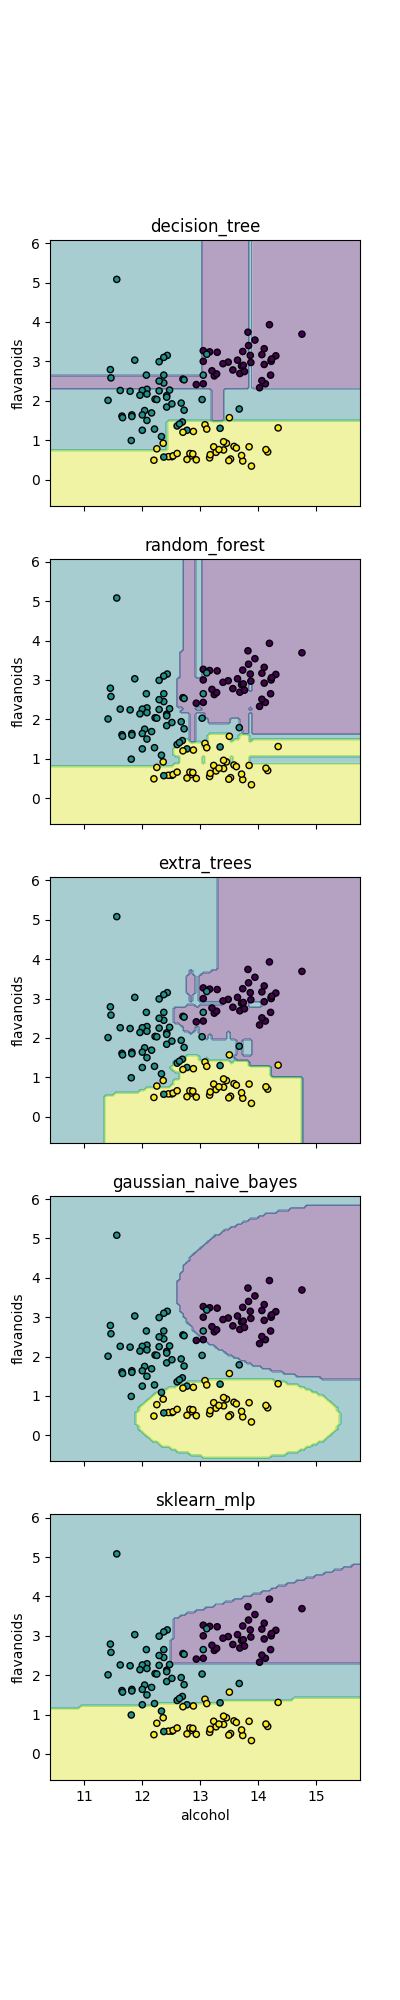 decision_tree, random_forest, extra_trees, gaussian_naive_bayes, sklearn_mlp